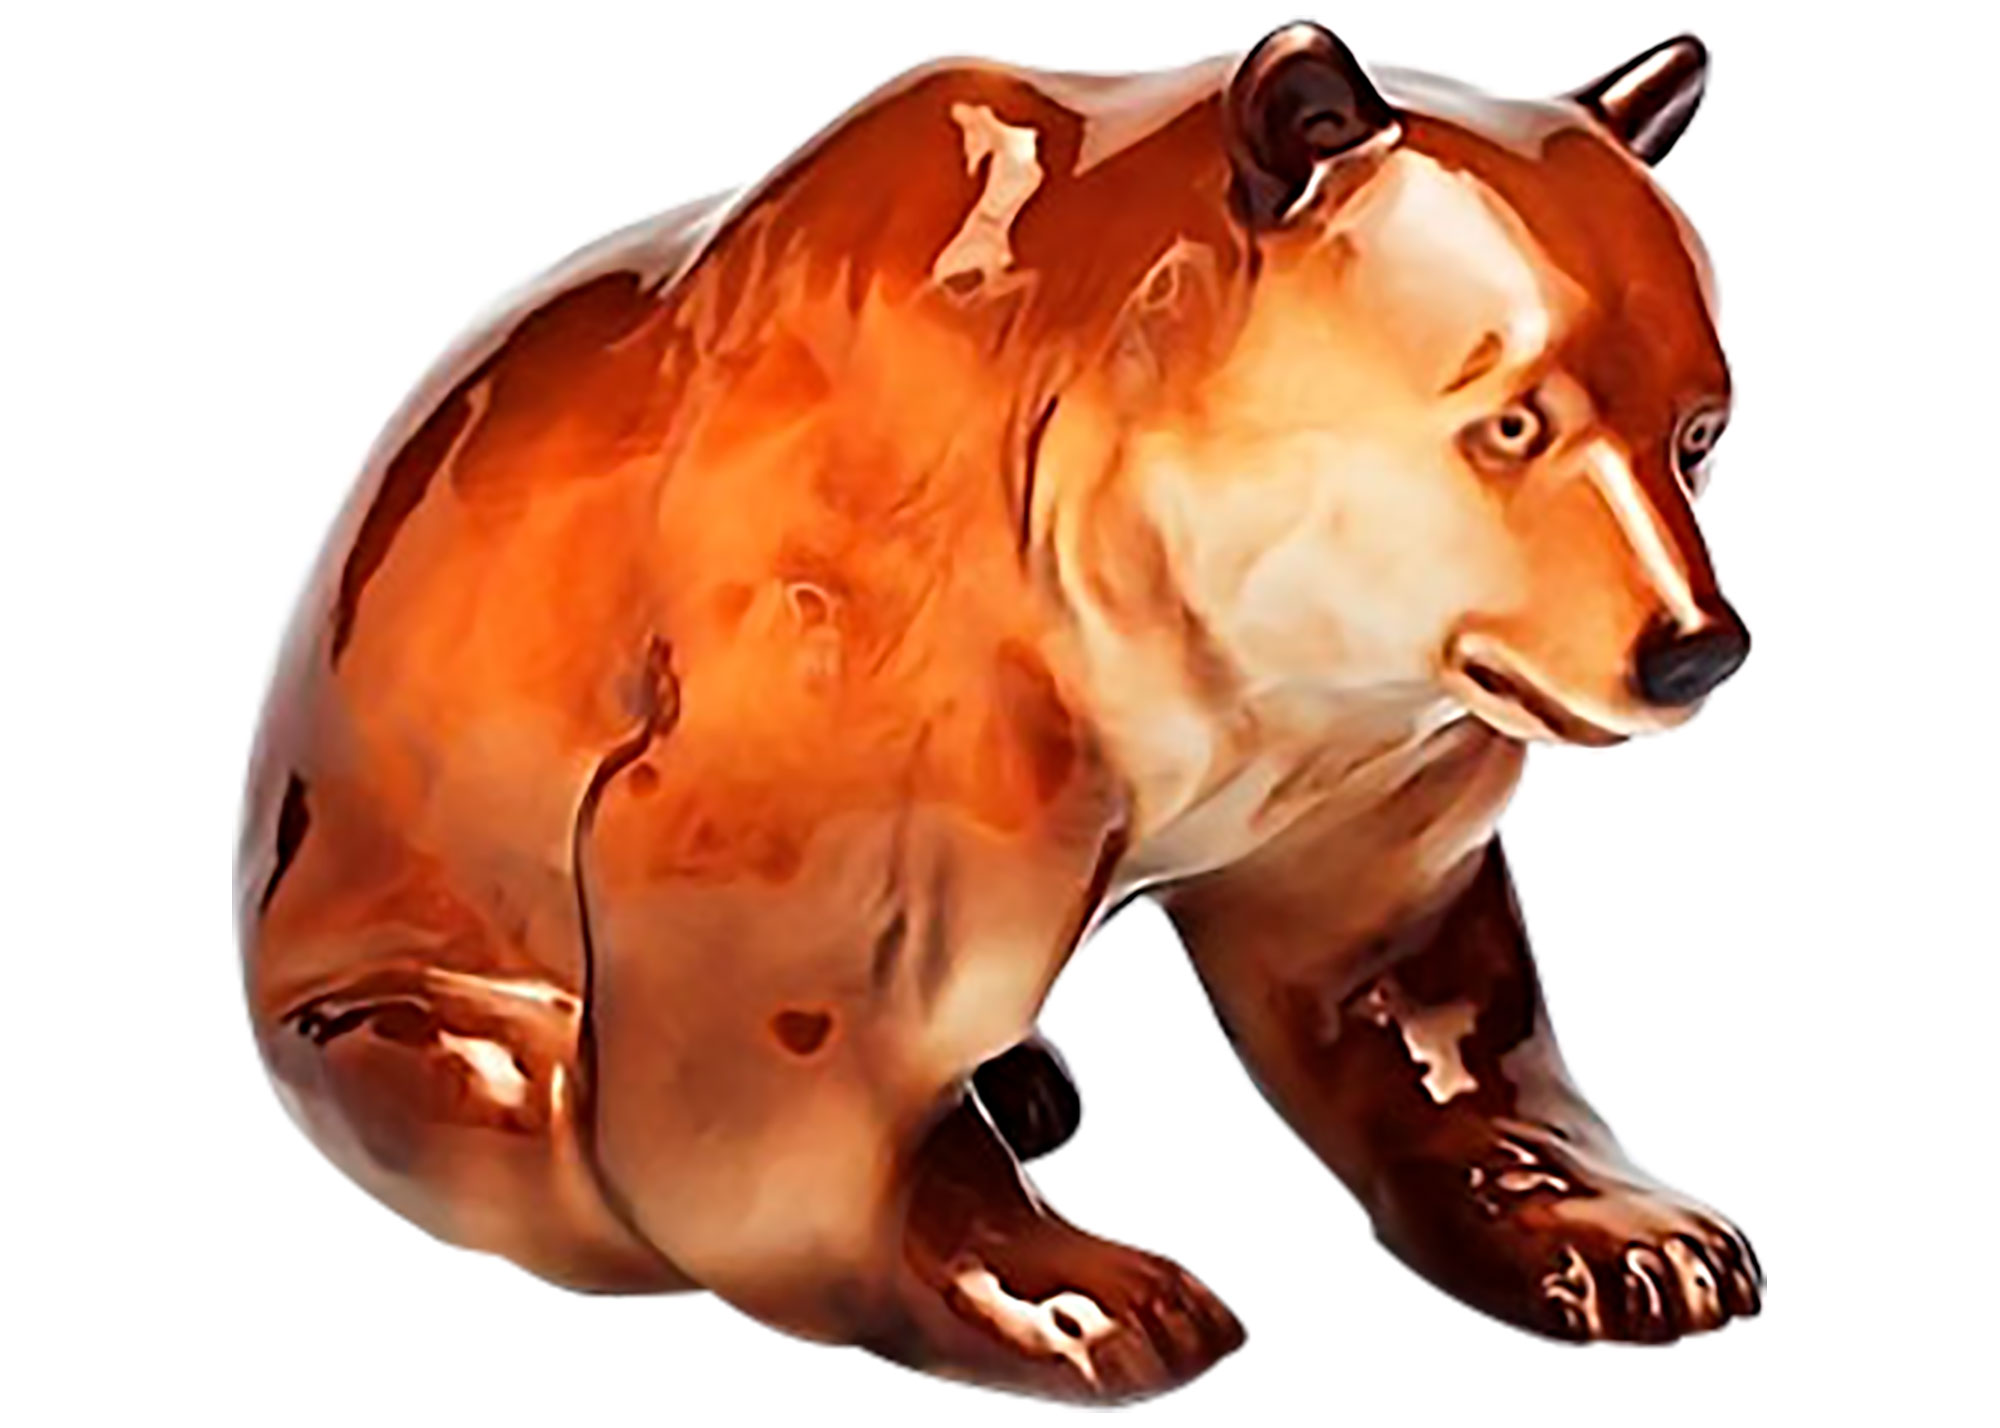 Buy Sitting Grizzly Bear Sculpture at GoldenCockerel.com